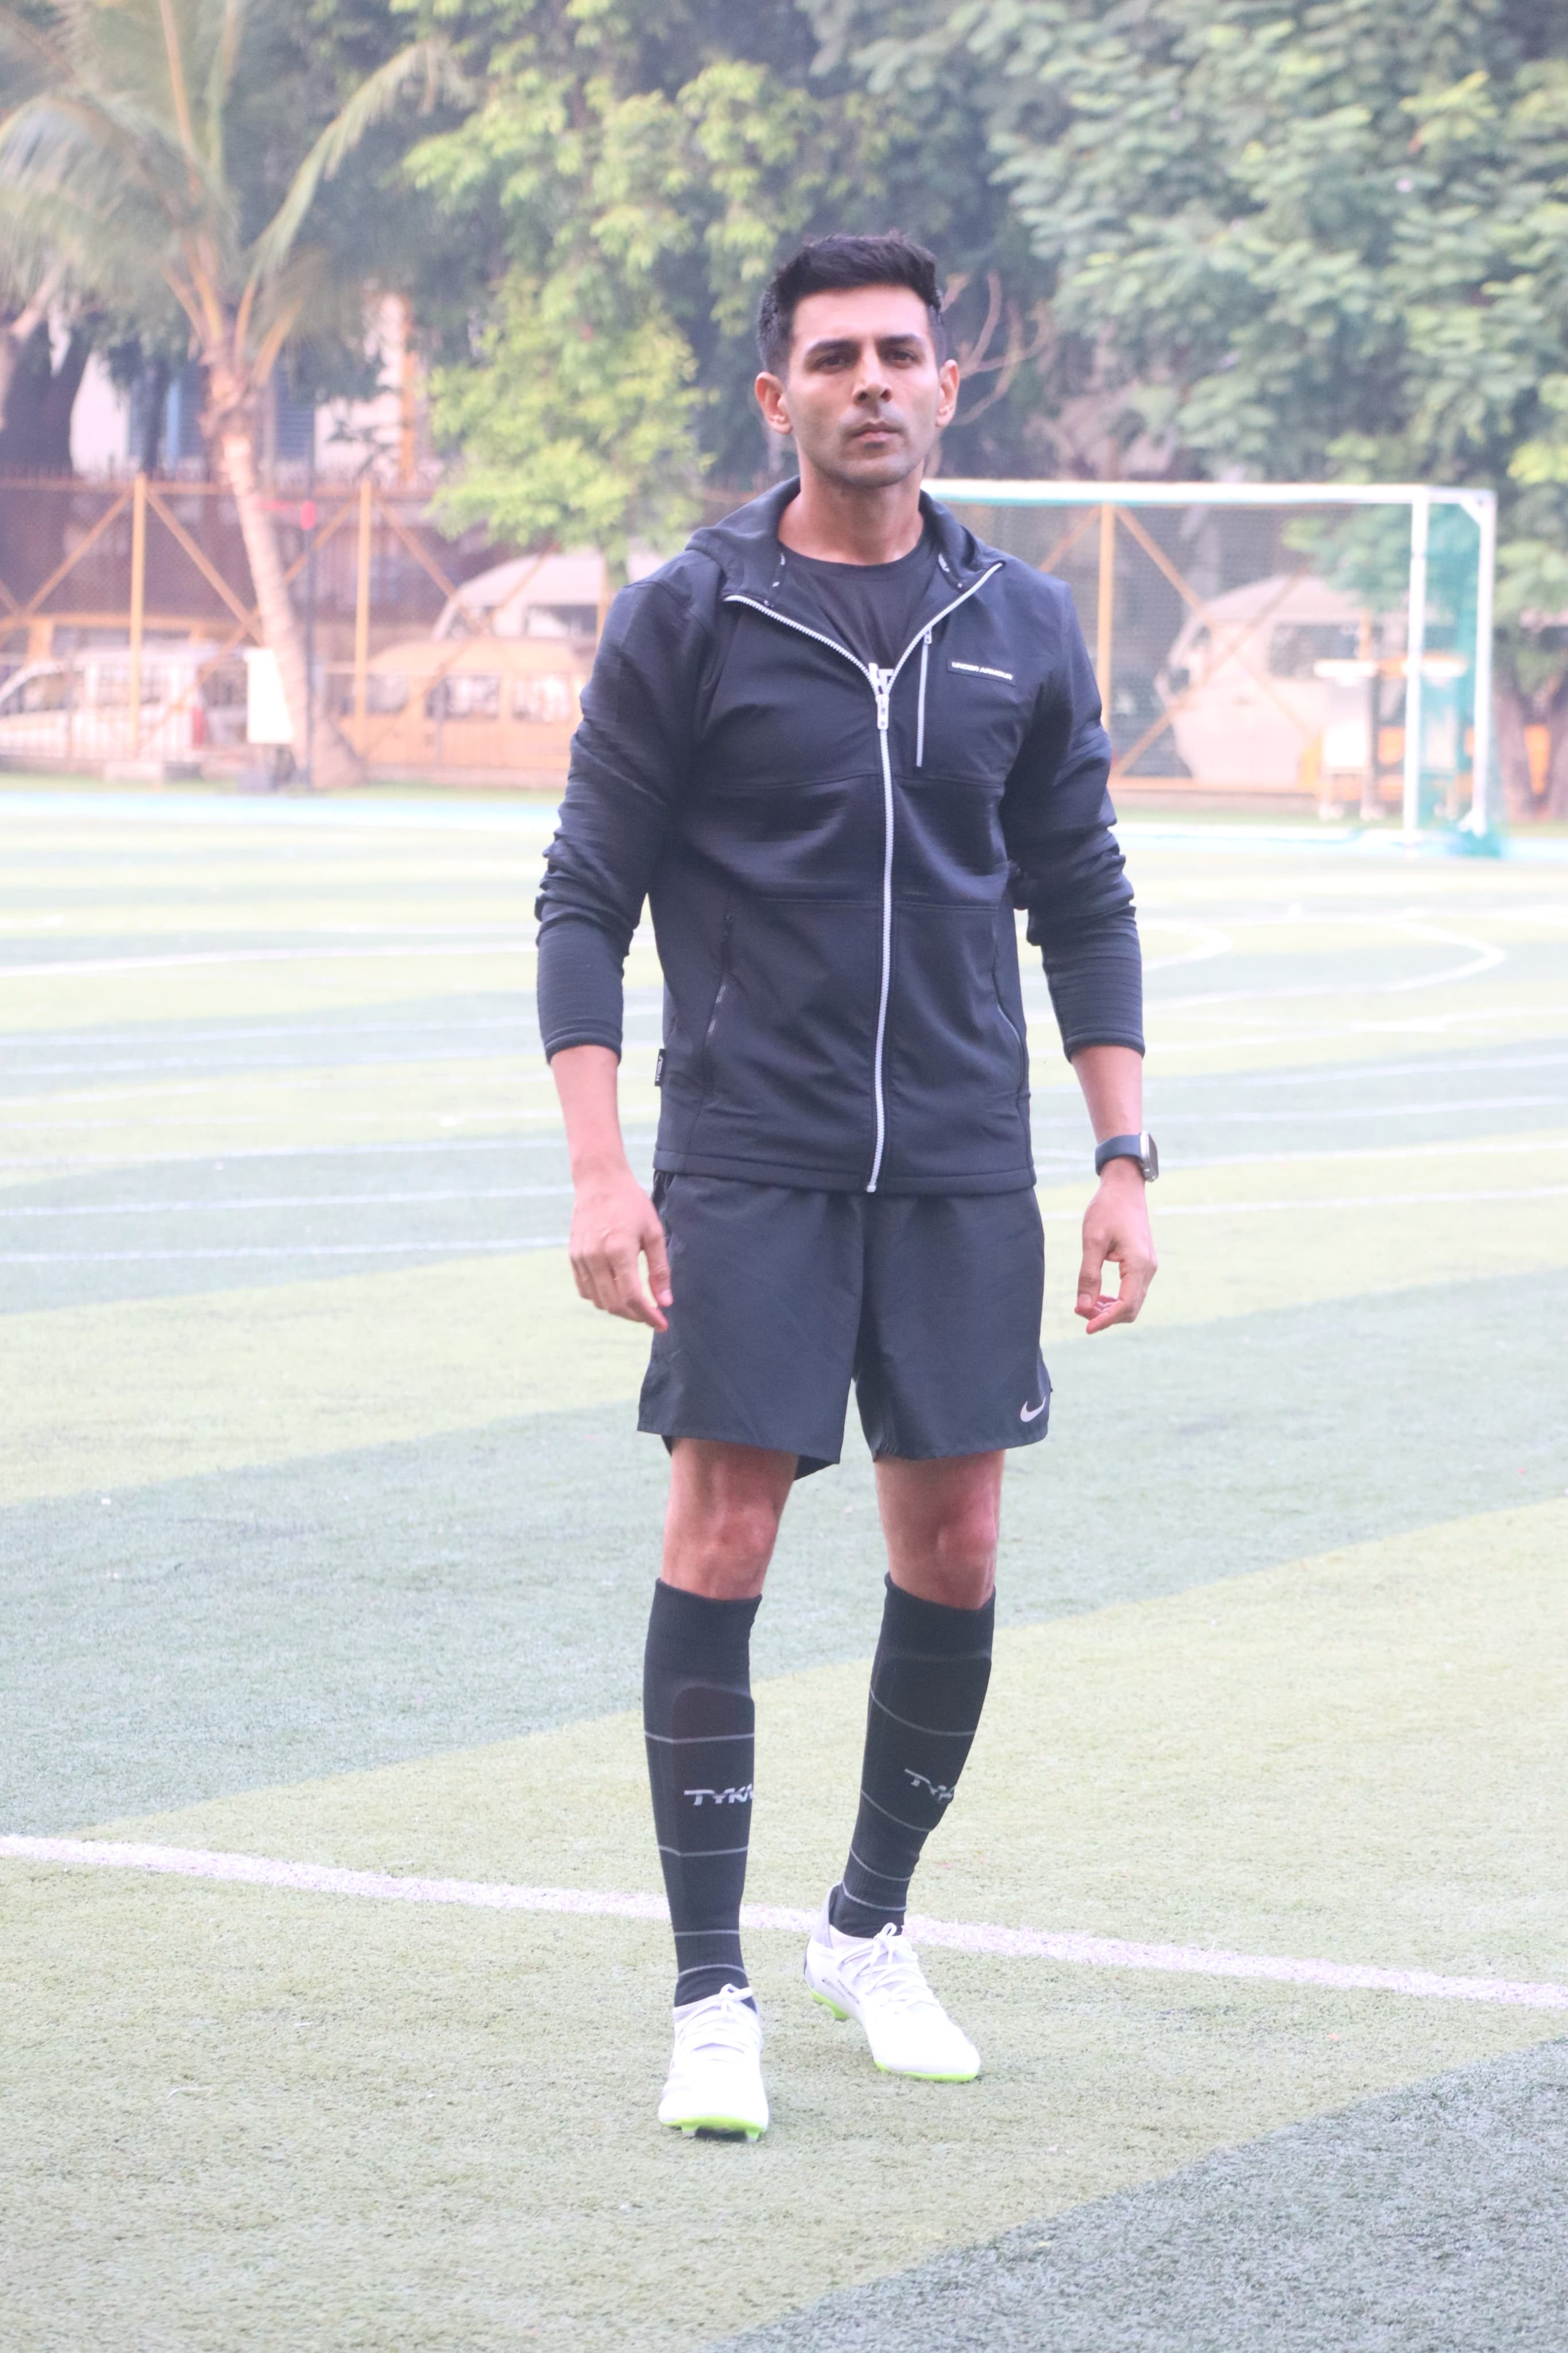 Kartik Aaryan posed for the paparazzi as he went for a football practice session